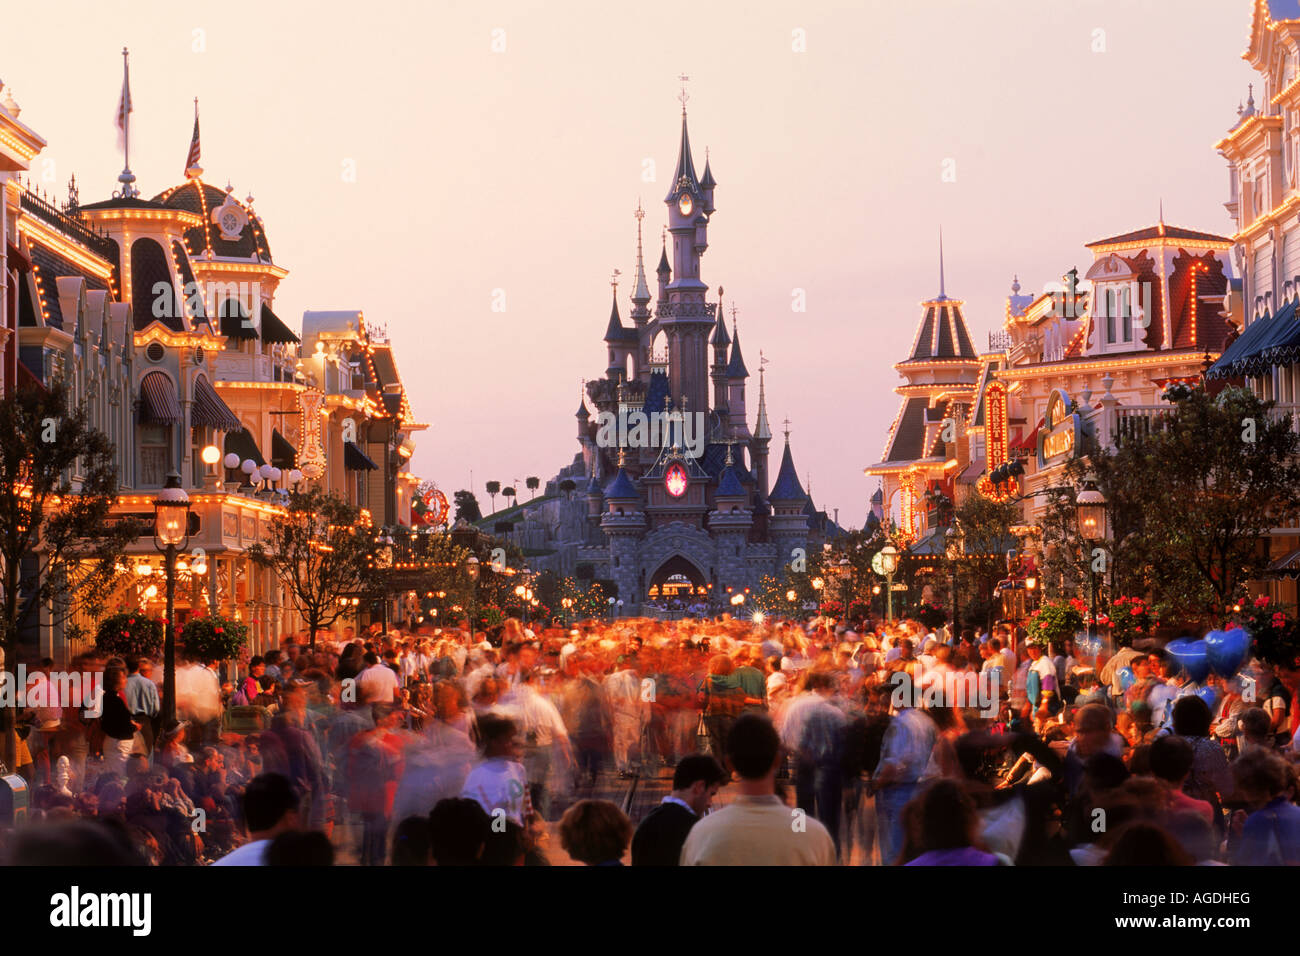 The Castle with Main Street shops and people in twilight light at Euro Disney Resort outside Paris Stock Photo